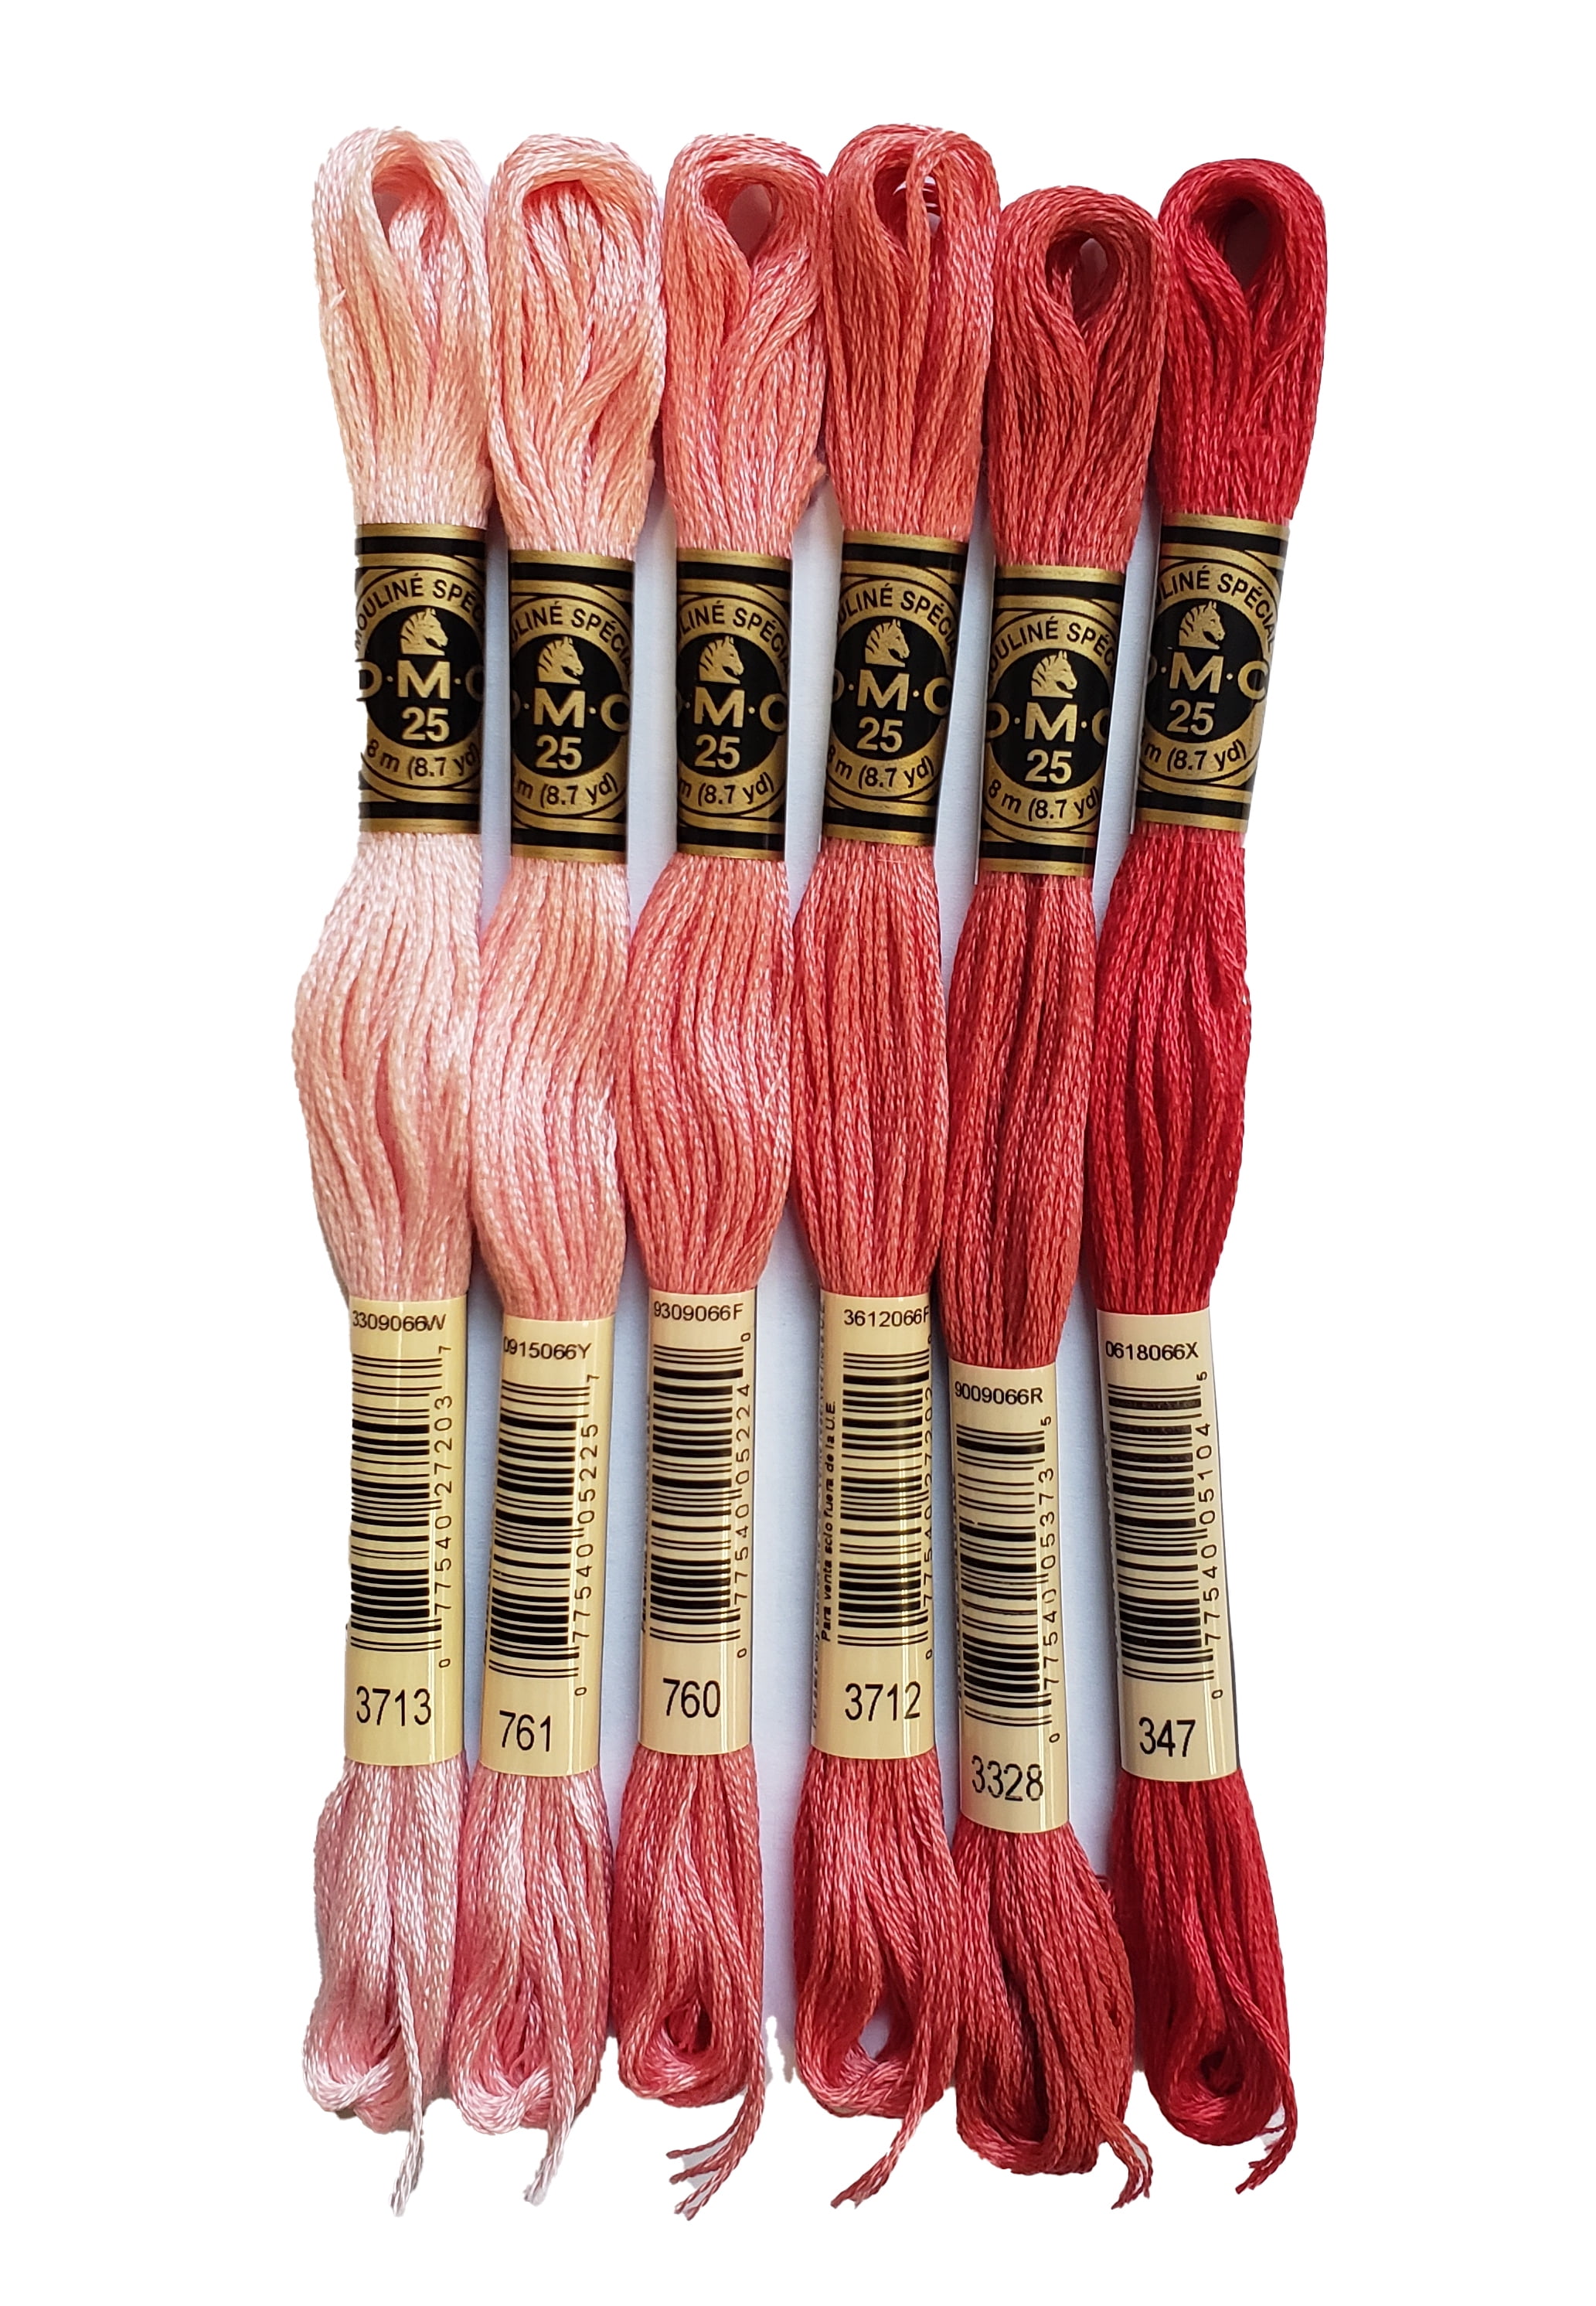 3-Pack DMC Size 6 Embroidery Floss #738 Almond Buff - Embroidery - Threads  - Notions